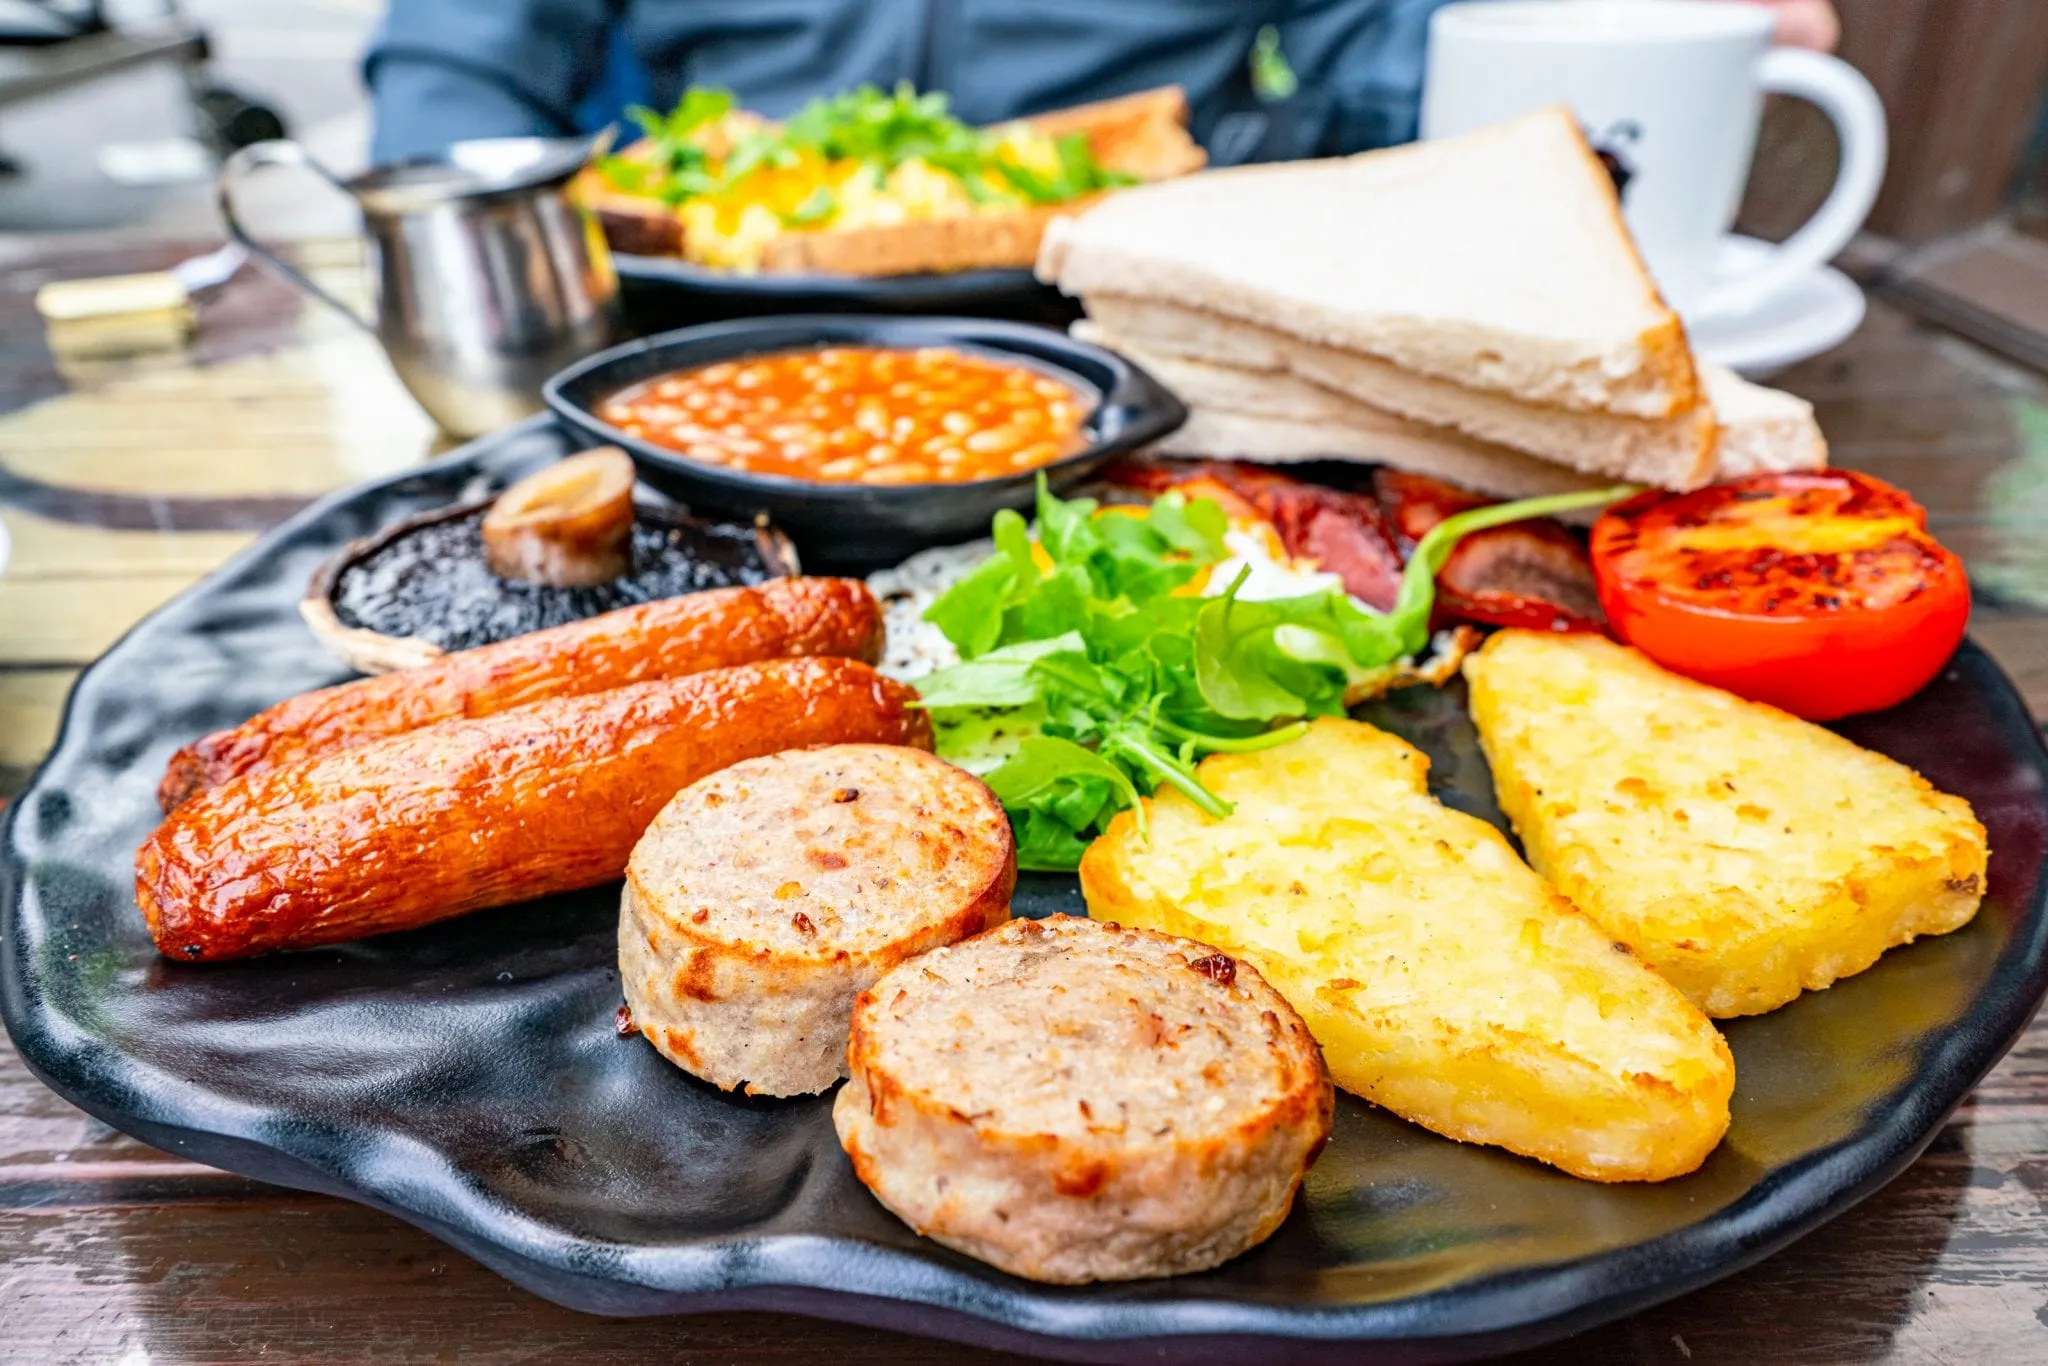 Full Irish breakfast served in Dublin, one of the best things to try when looking for the best food in Ireland